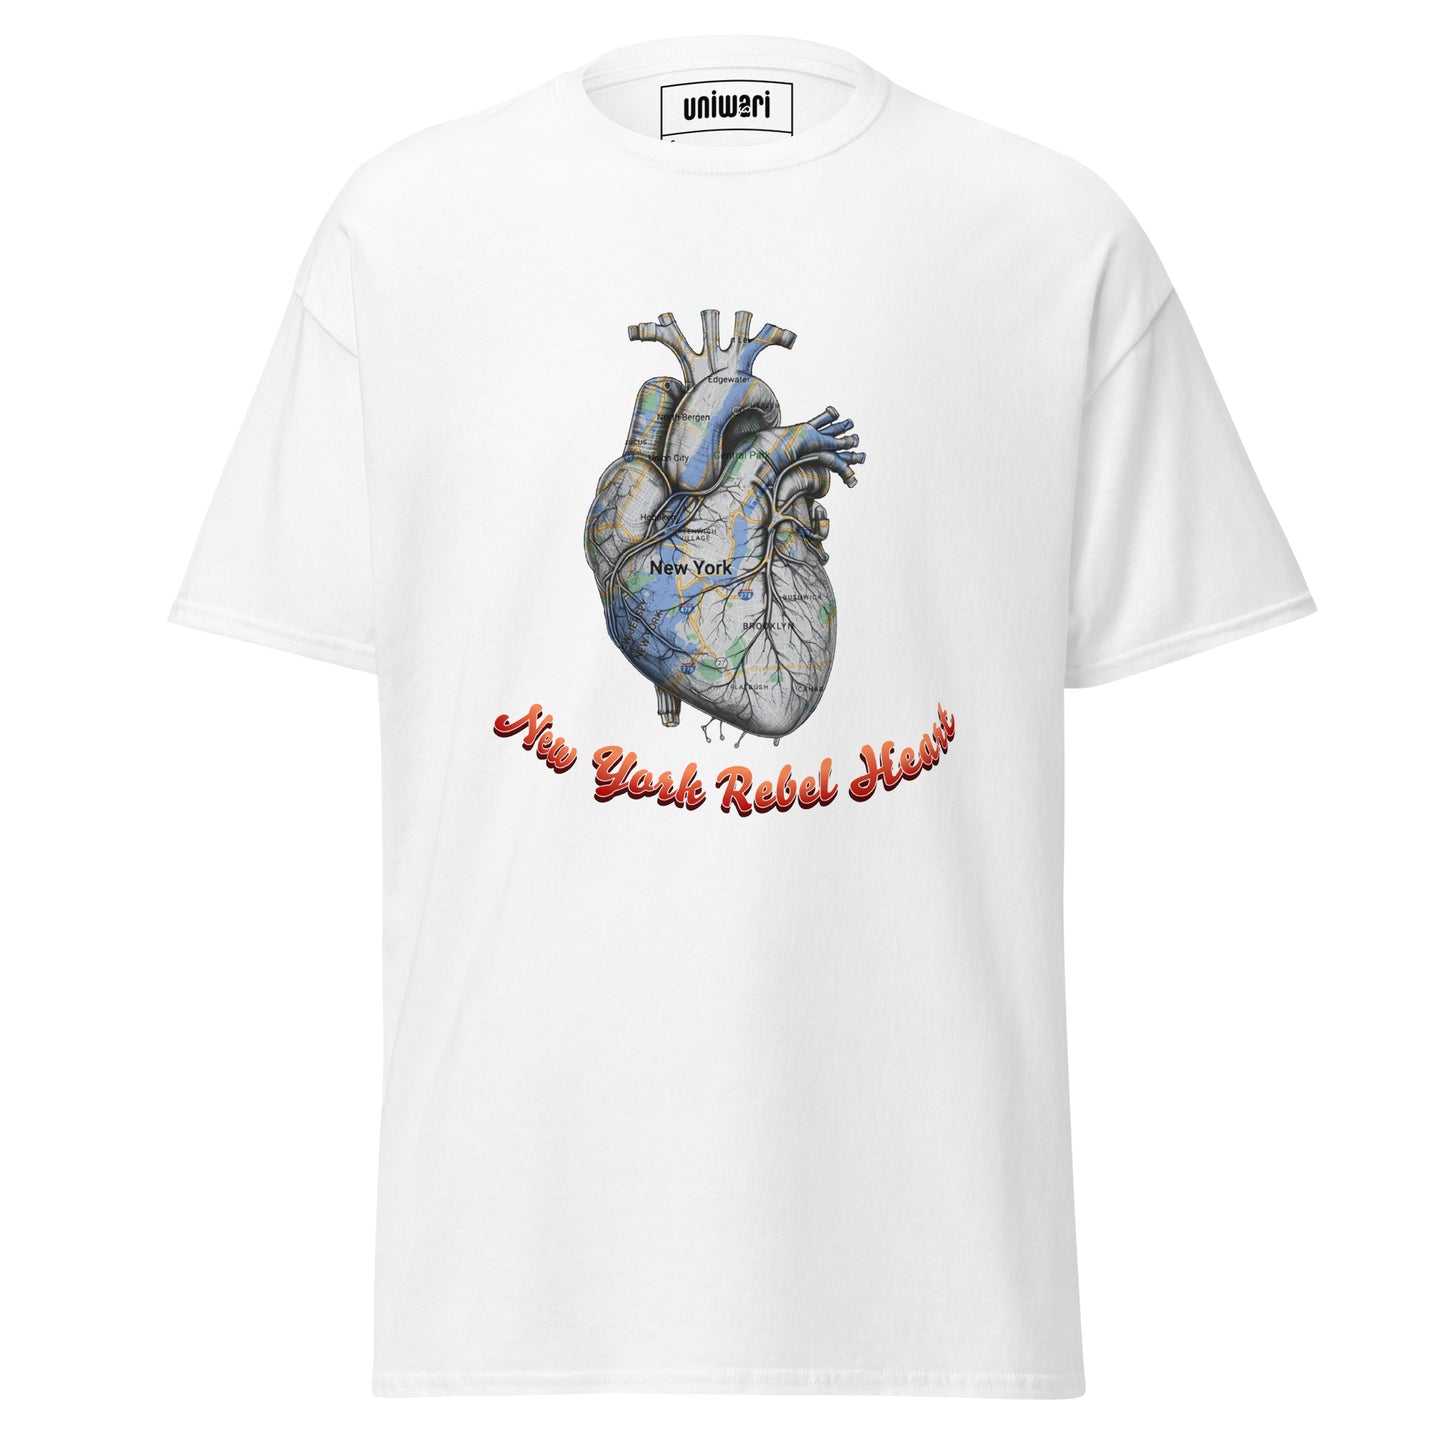 White High Quality Tee - Front Design with a Heart Shaped Map of New York and a Phrase "New York Rebel Heart" print